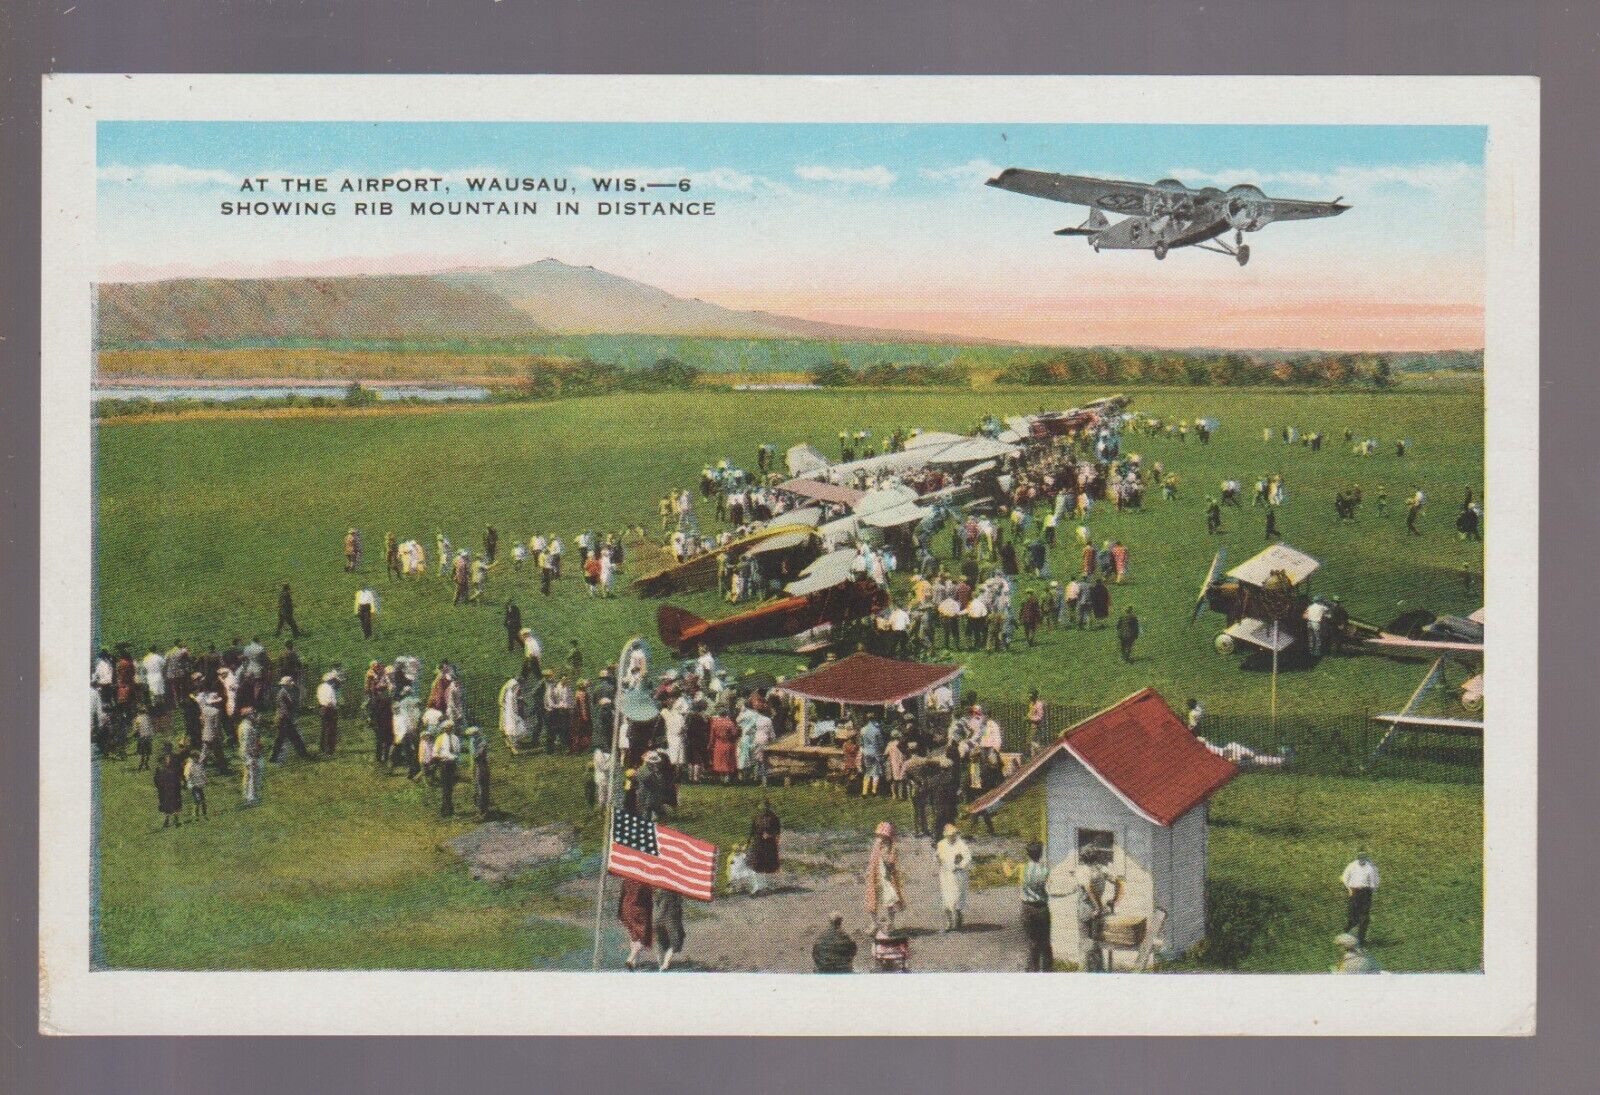 Wausau WISCONSIN c1920s AIRSHOW Airport AIRPLANES FLYING Plane Planes CROWD KB